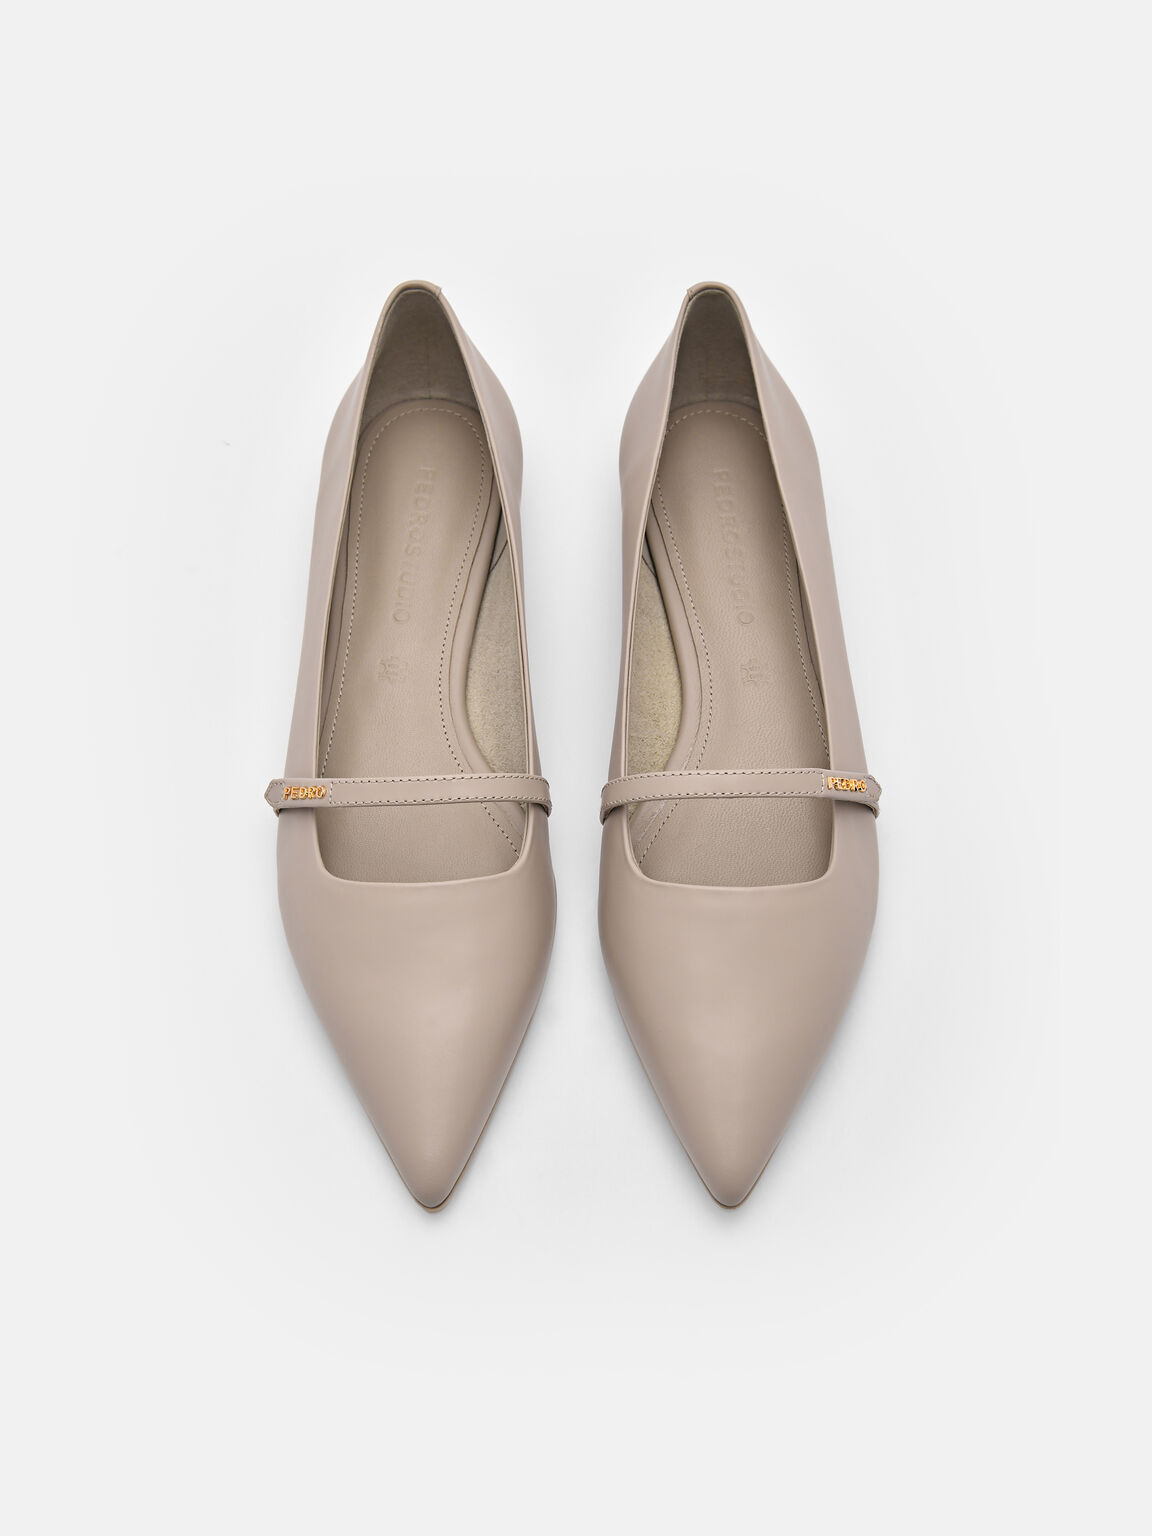 PEDRO Studio Amerie Leather Mary Janes, Taupe